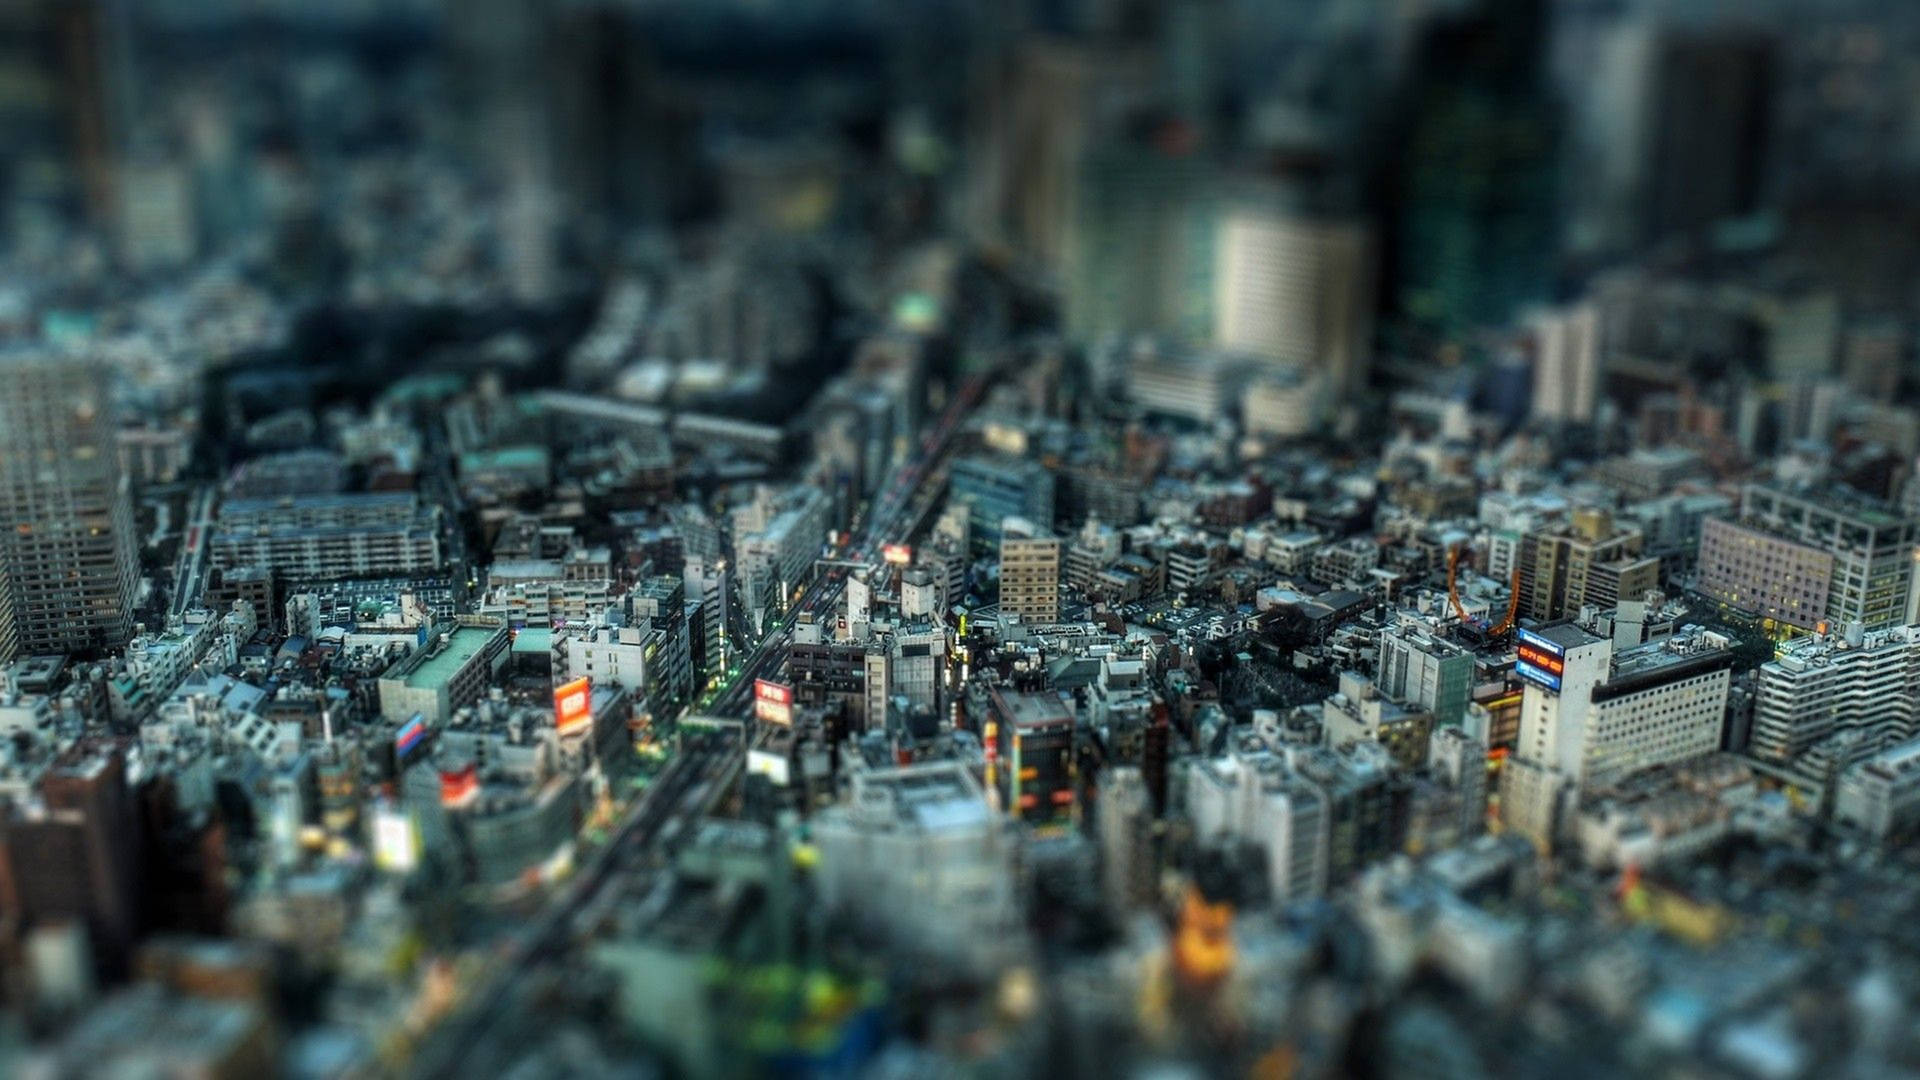 Stunning 3d Hd Depiction Of A Miniature City Model From An Aerial Perspective Background